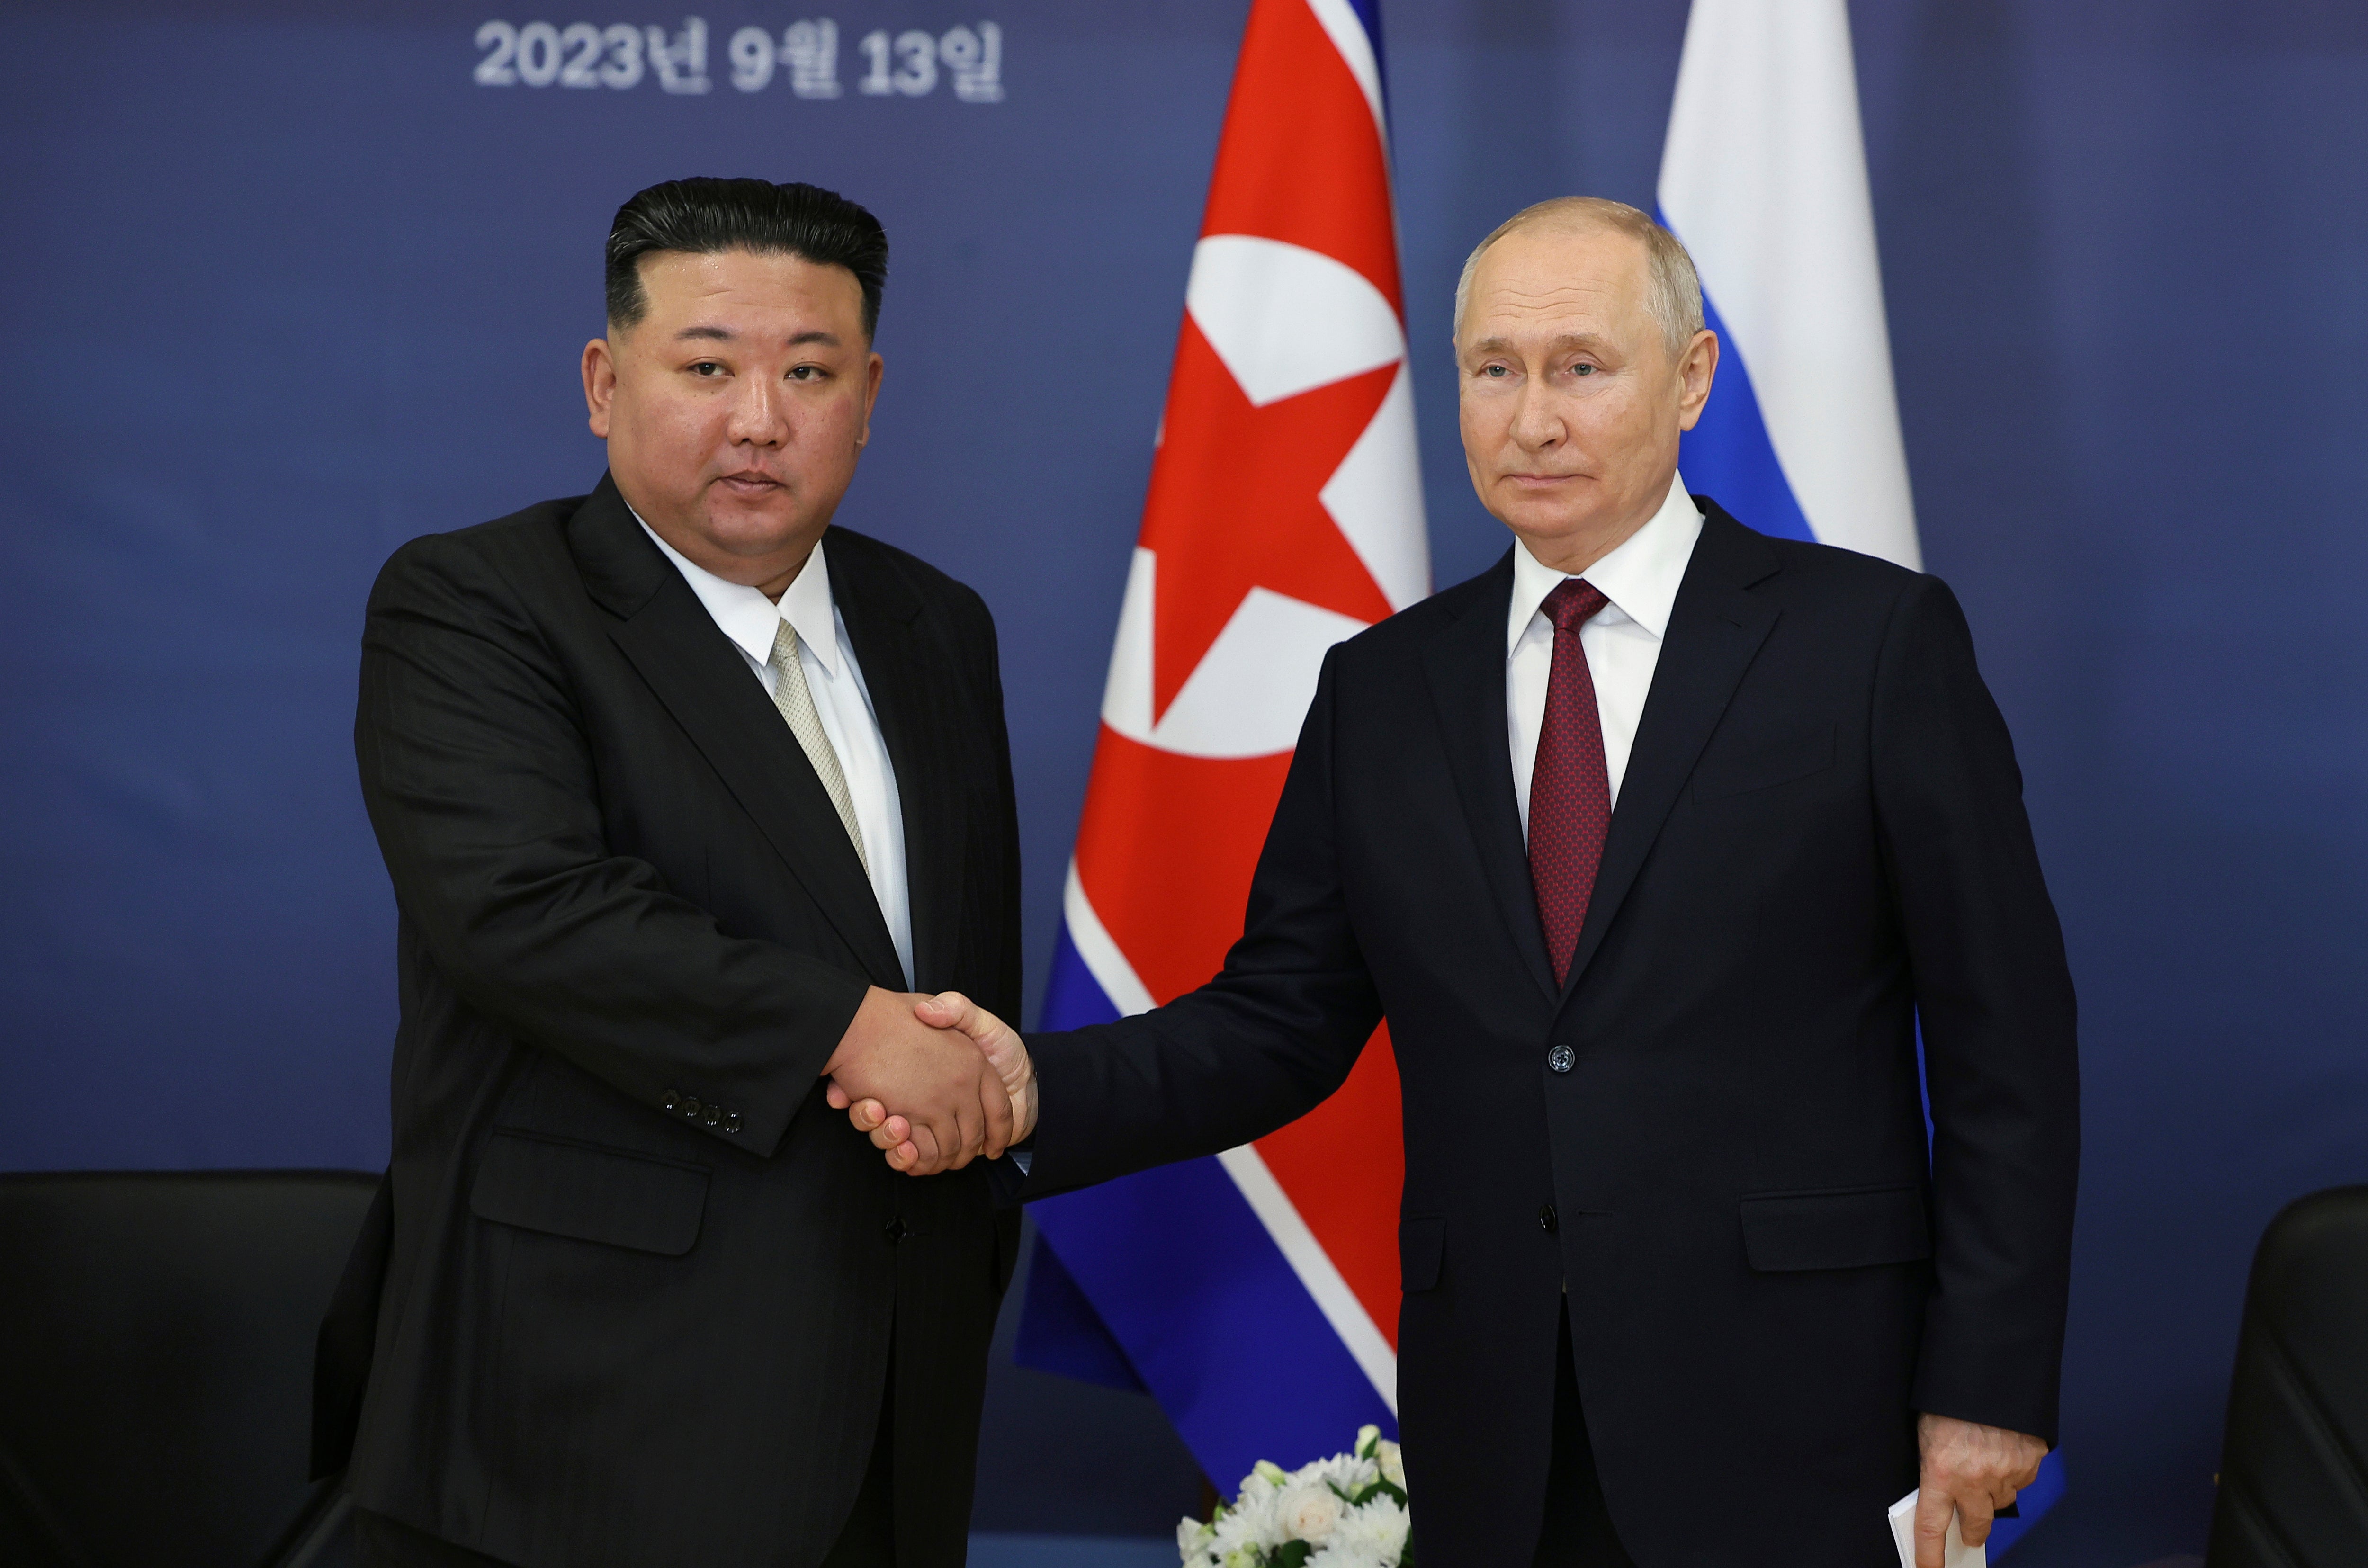 Russian president Vladimir Putin and North Korea’s leader Kim Jong-un shake hands during their meeting at the Vostochny cosmodrome in September this year